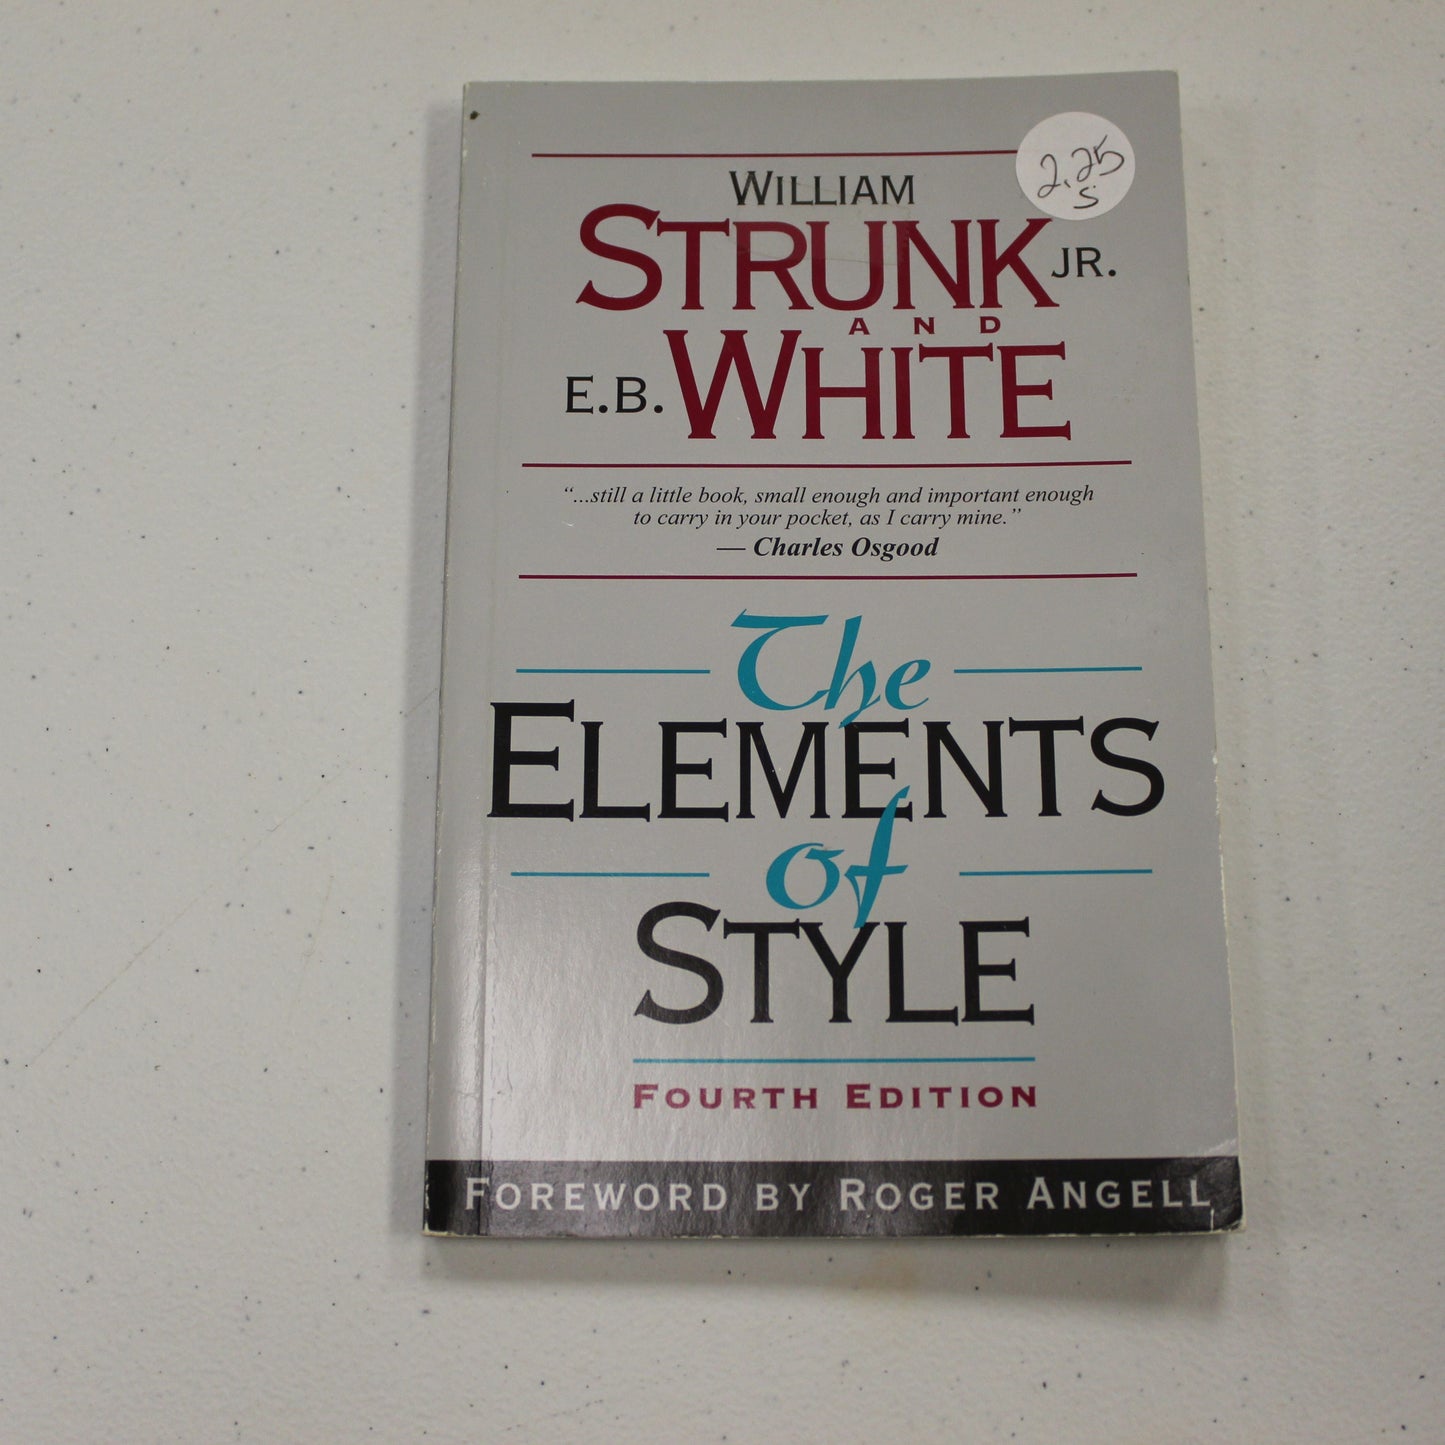 THE ELEMENTS OF STYLE